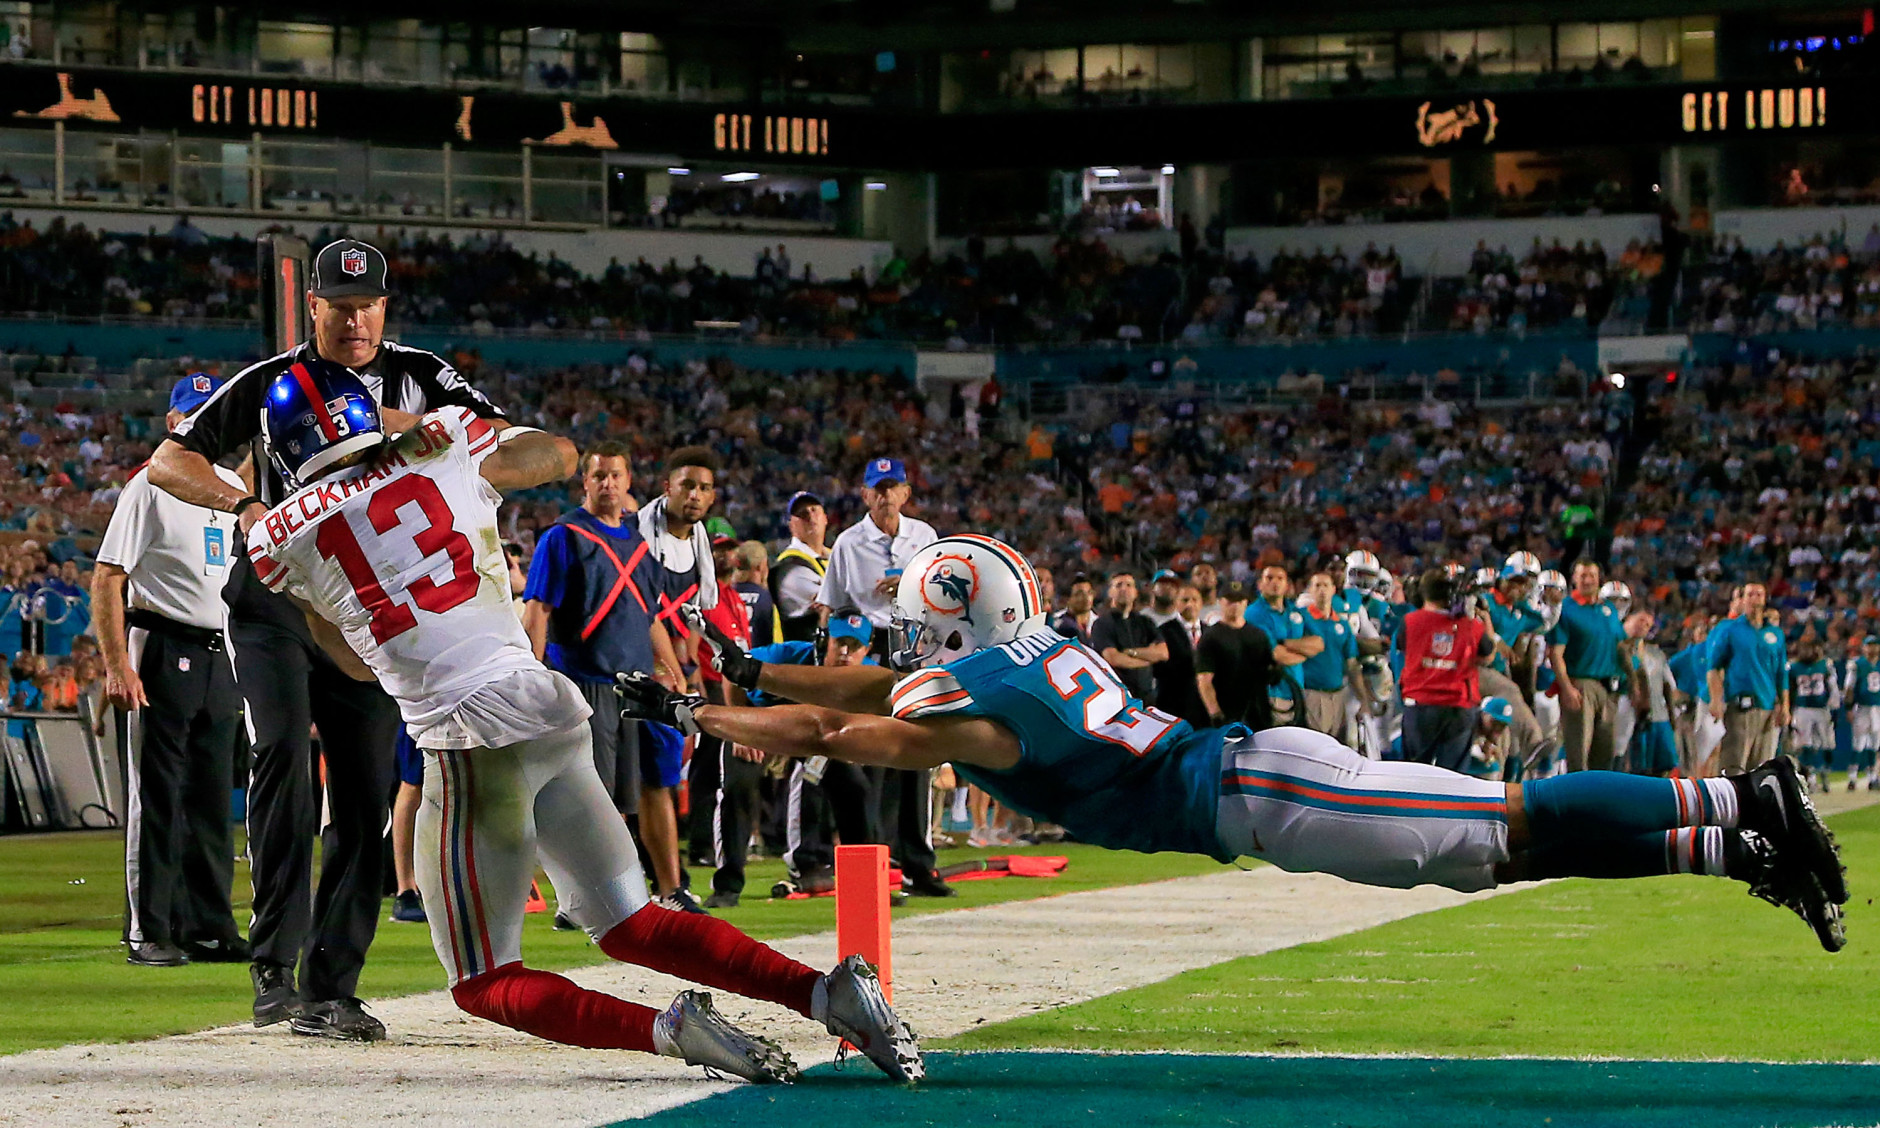 MIAMI GARDENS, FL - DECEMBER 14: Odell Beckham #13 of the New York Giants catches a touchdown pass as Brent Grimes #21 of the Miami Dolphins defends during the third quarter of the game at Sun Life Stadium on December 14, 2015 in Miami Gardens, Florida.  (Photo by Chris Trotman/Getty Images)